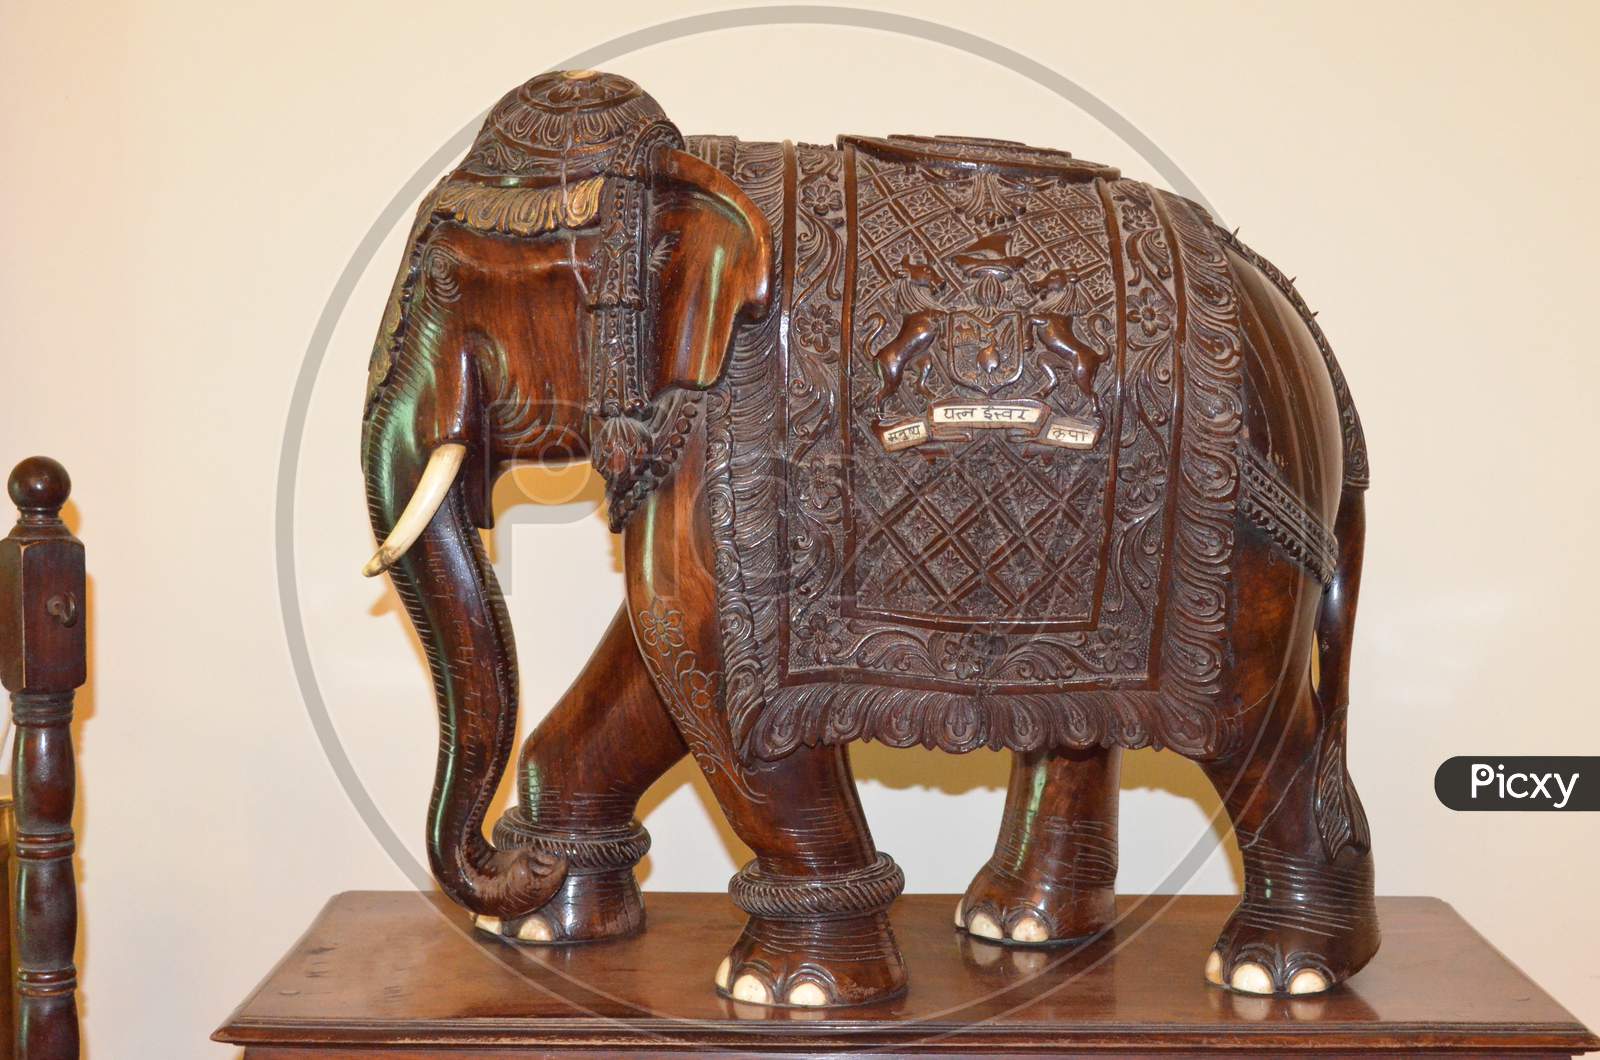 Wooden Elephant in Ancient carving